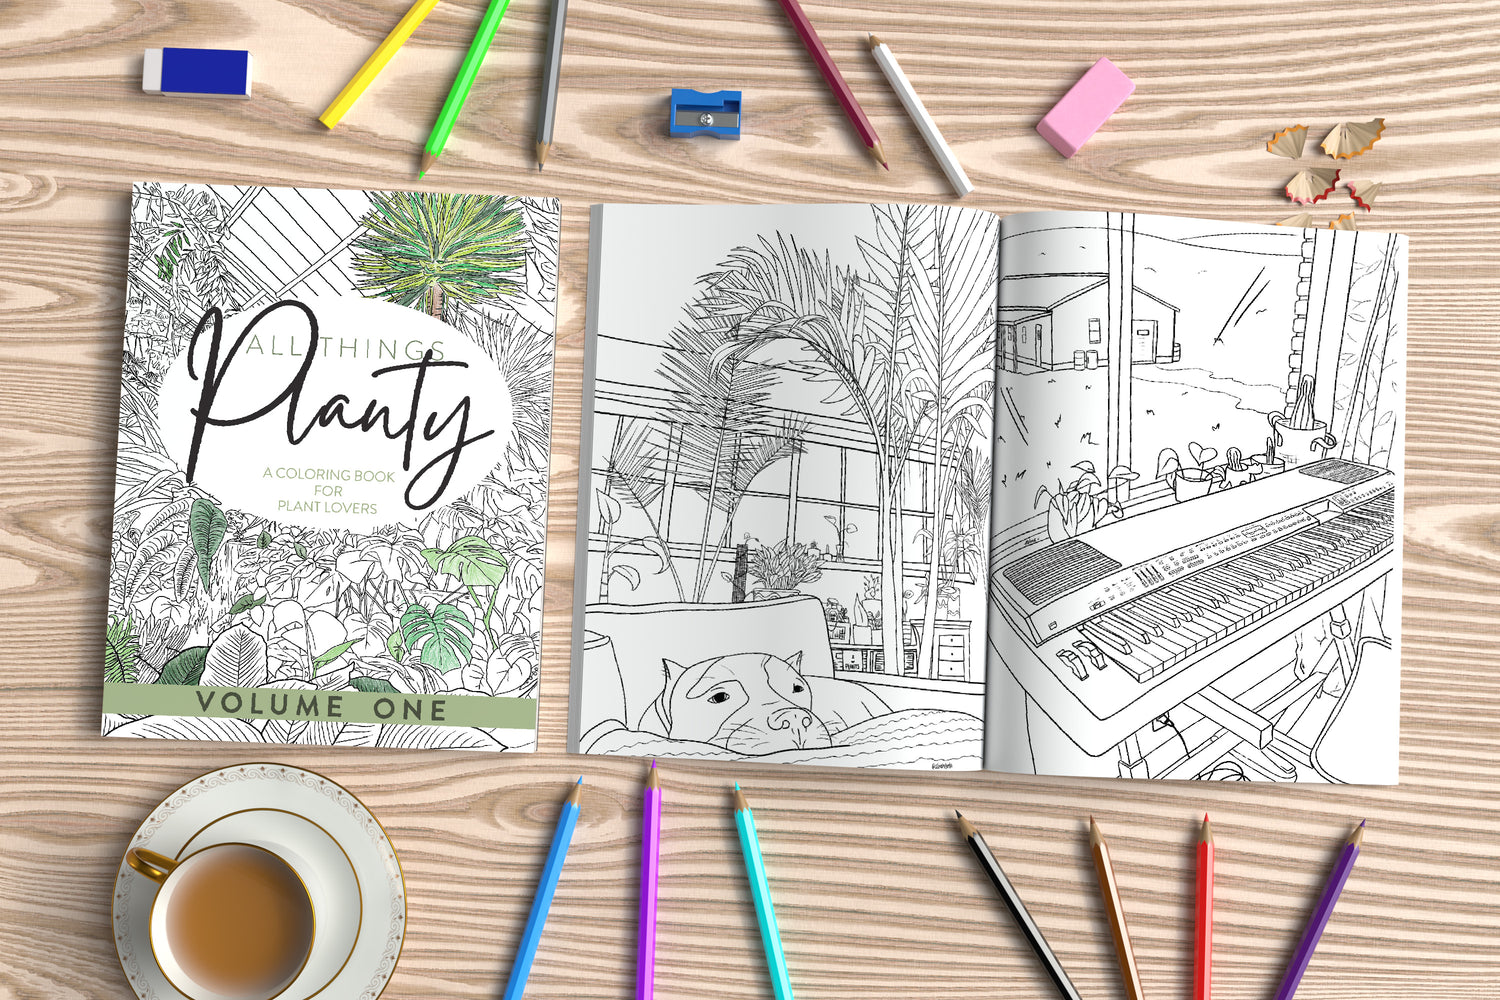 All Things Planty - A Coloring Book for Plant Lovers, Vol 1.